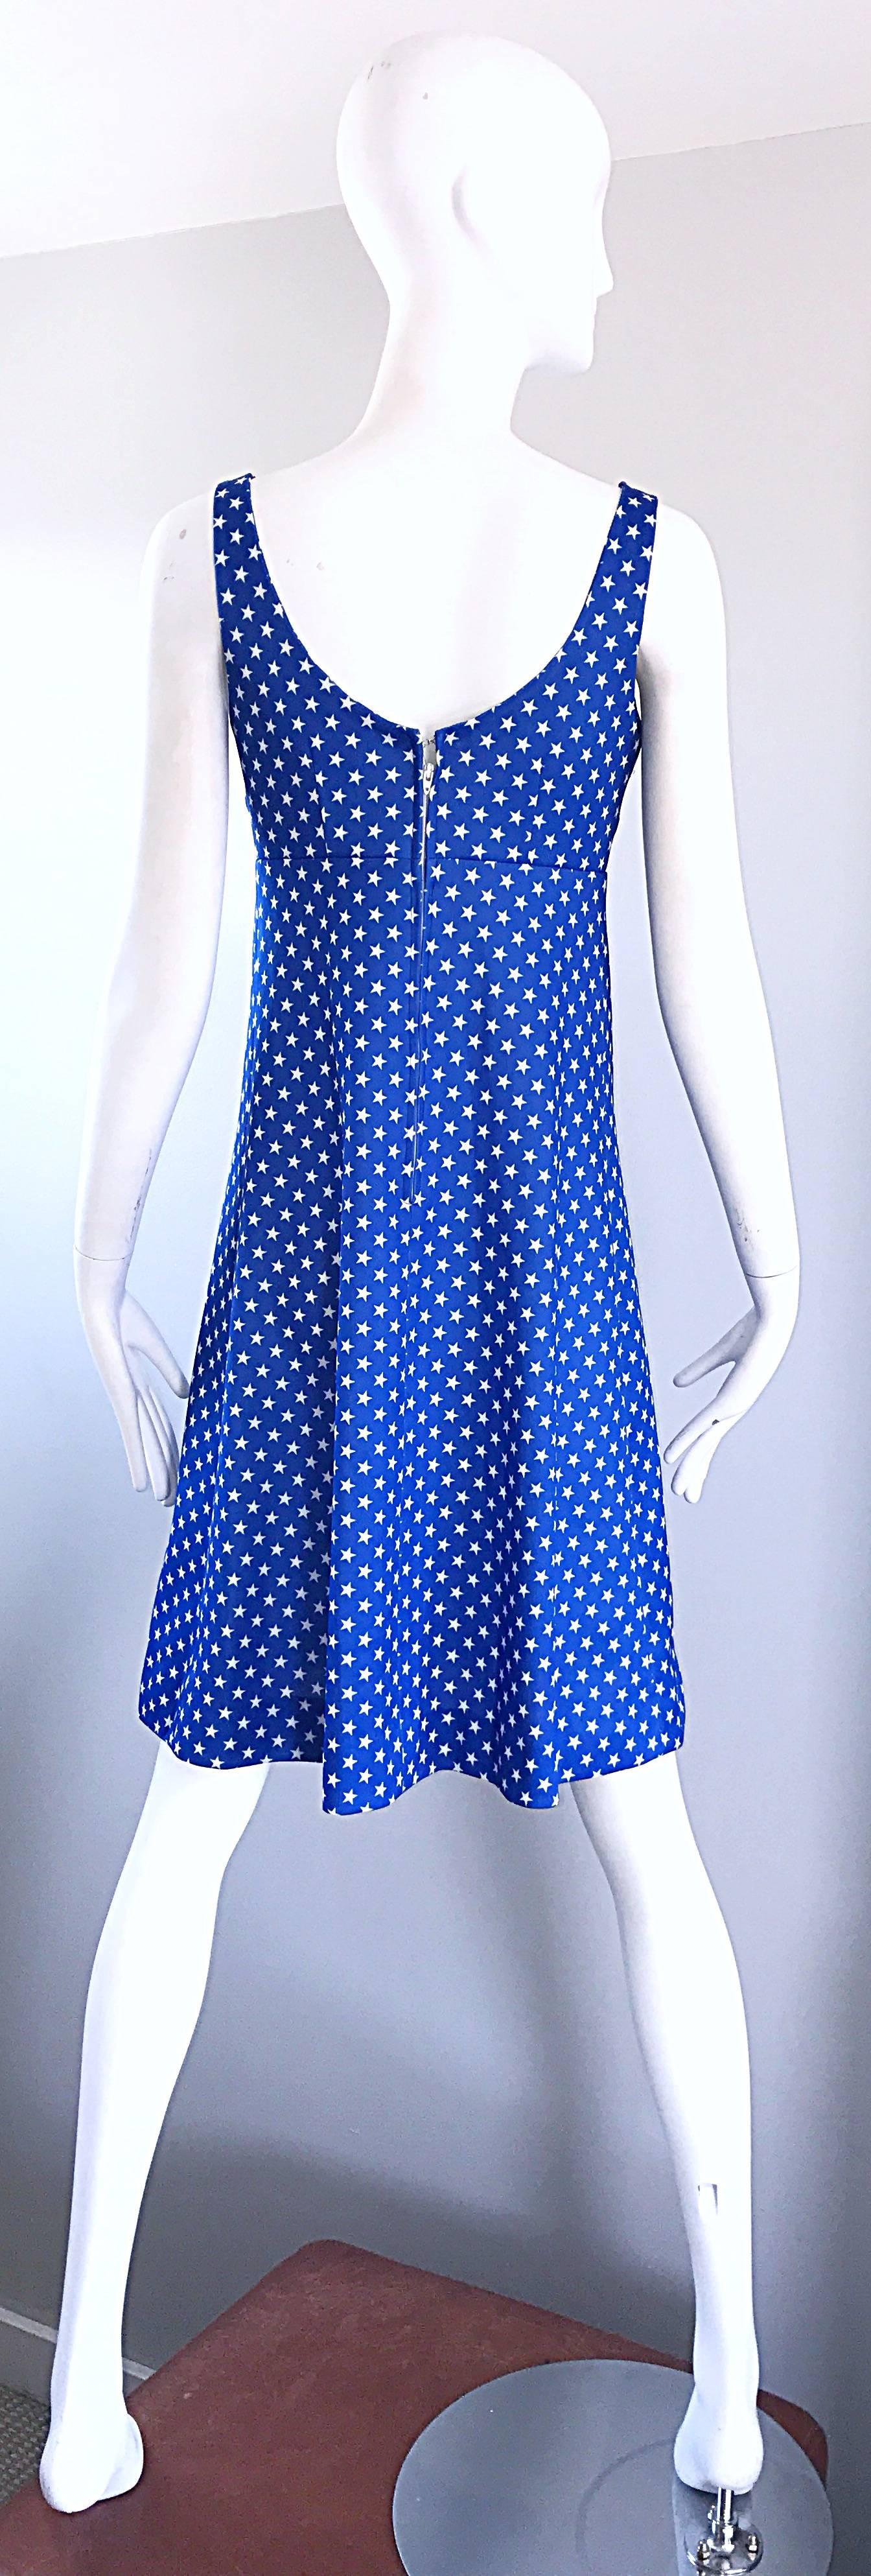 1960s Royal Blue and White Star Print A - Line Novelty Vintage 60s Dress For Sale 1